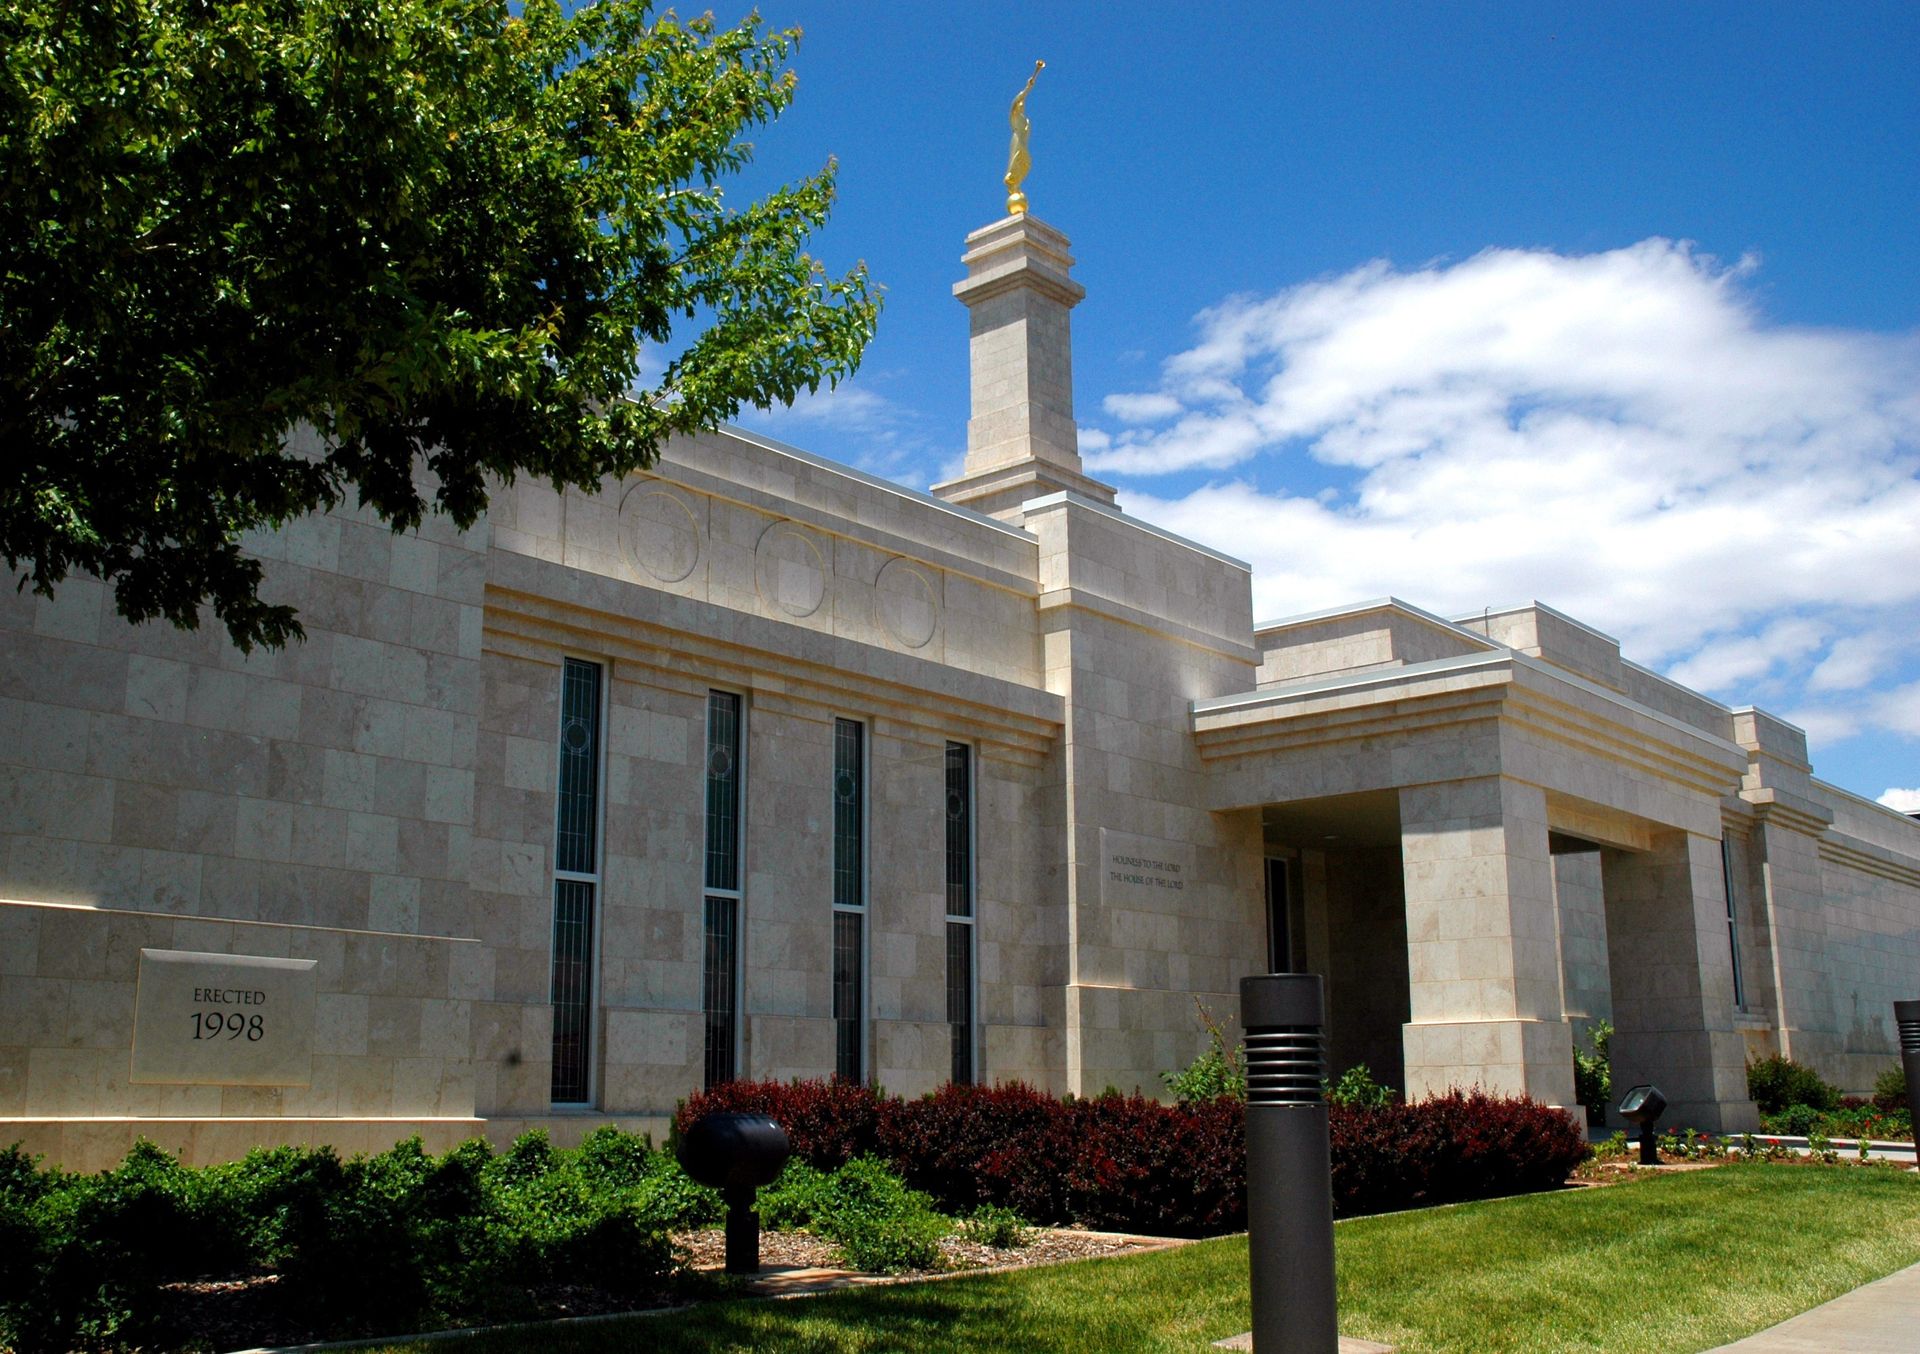 The Monticello Utah Temple entrance, including scenery.